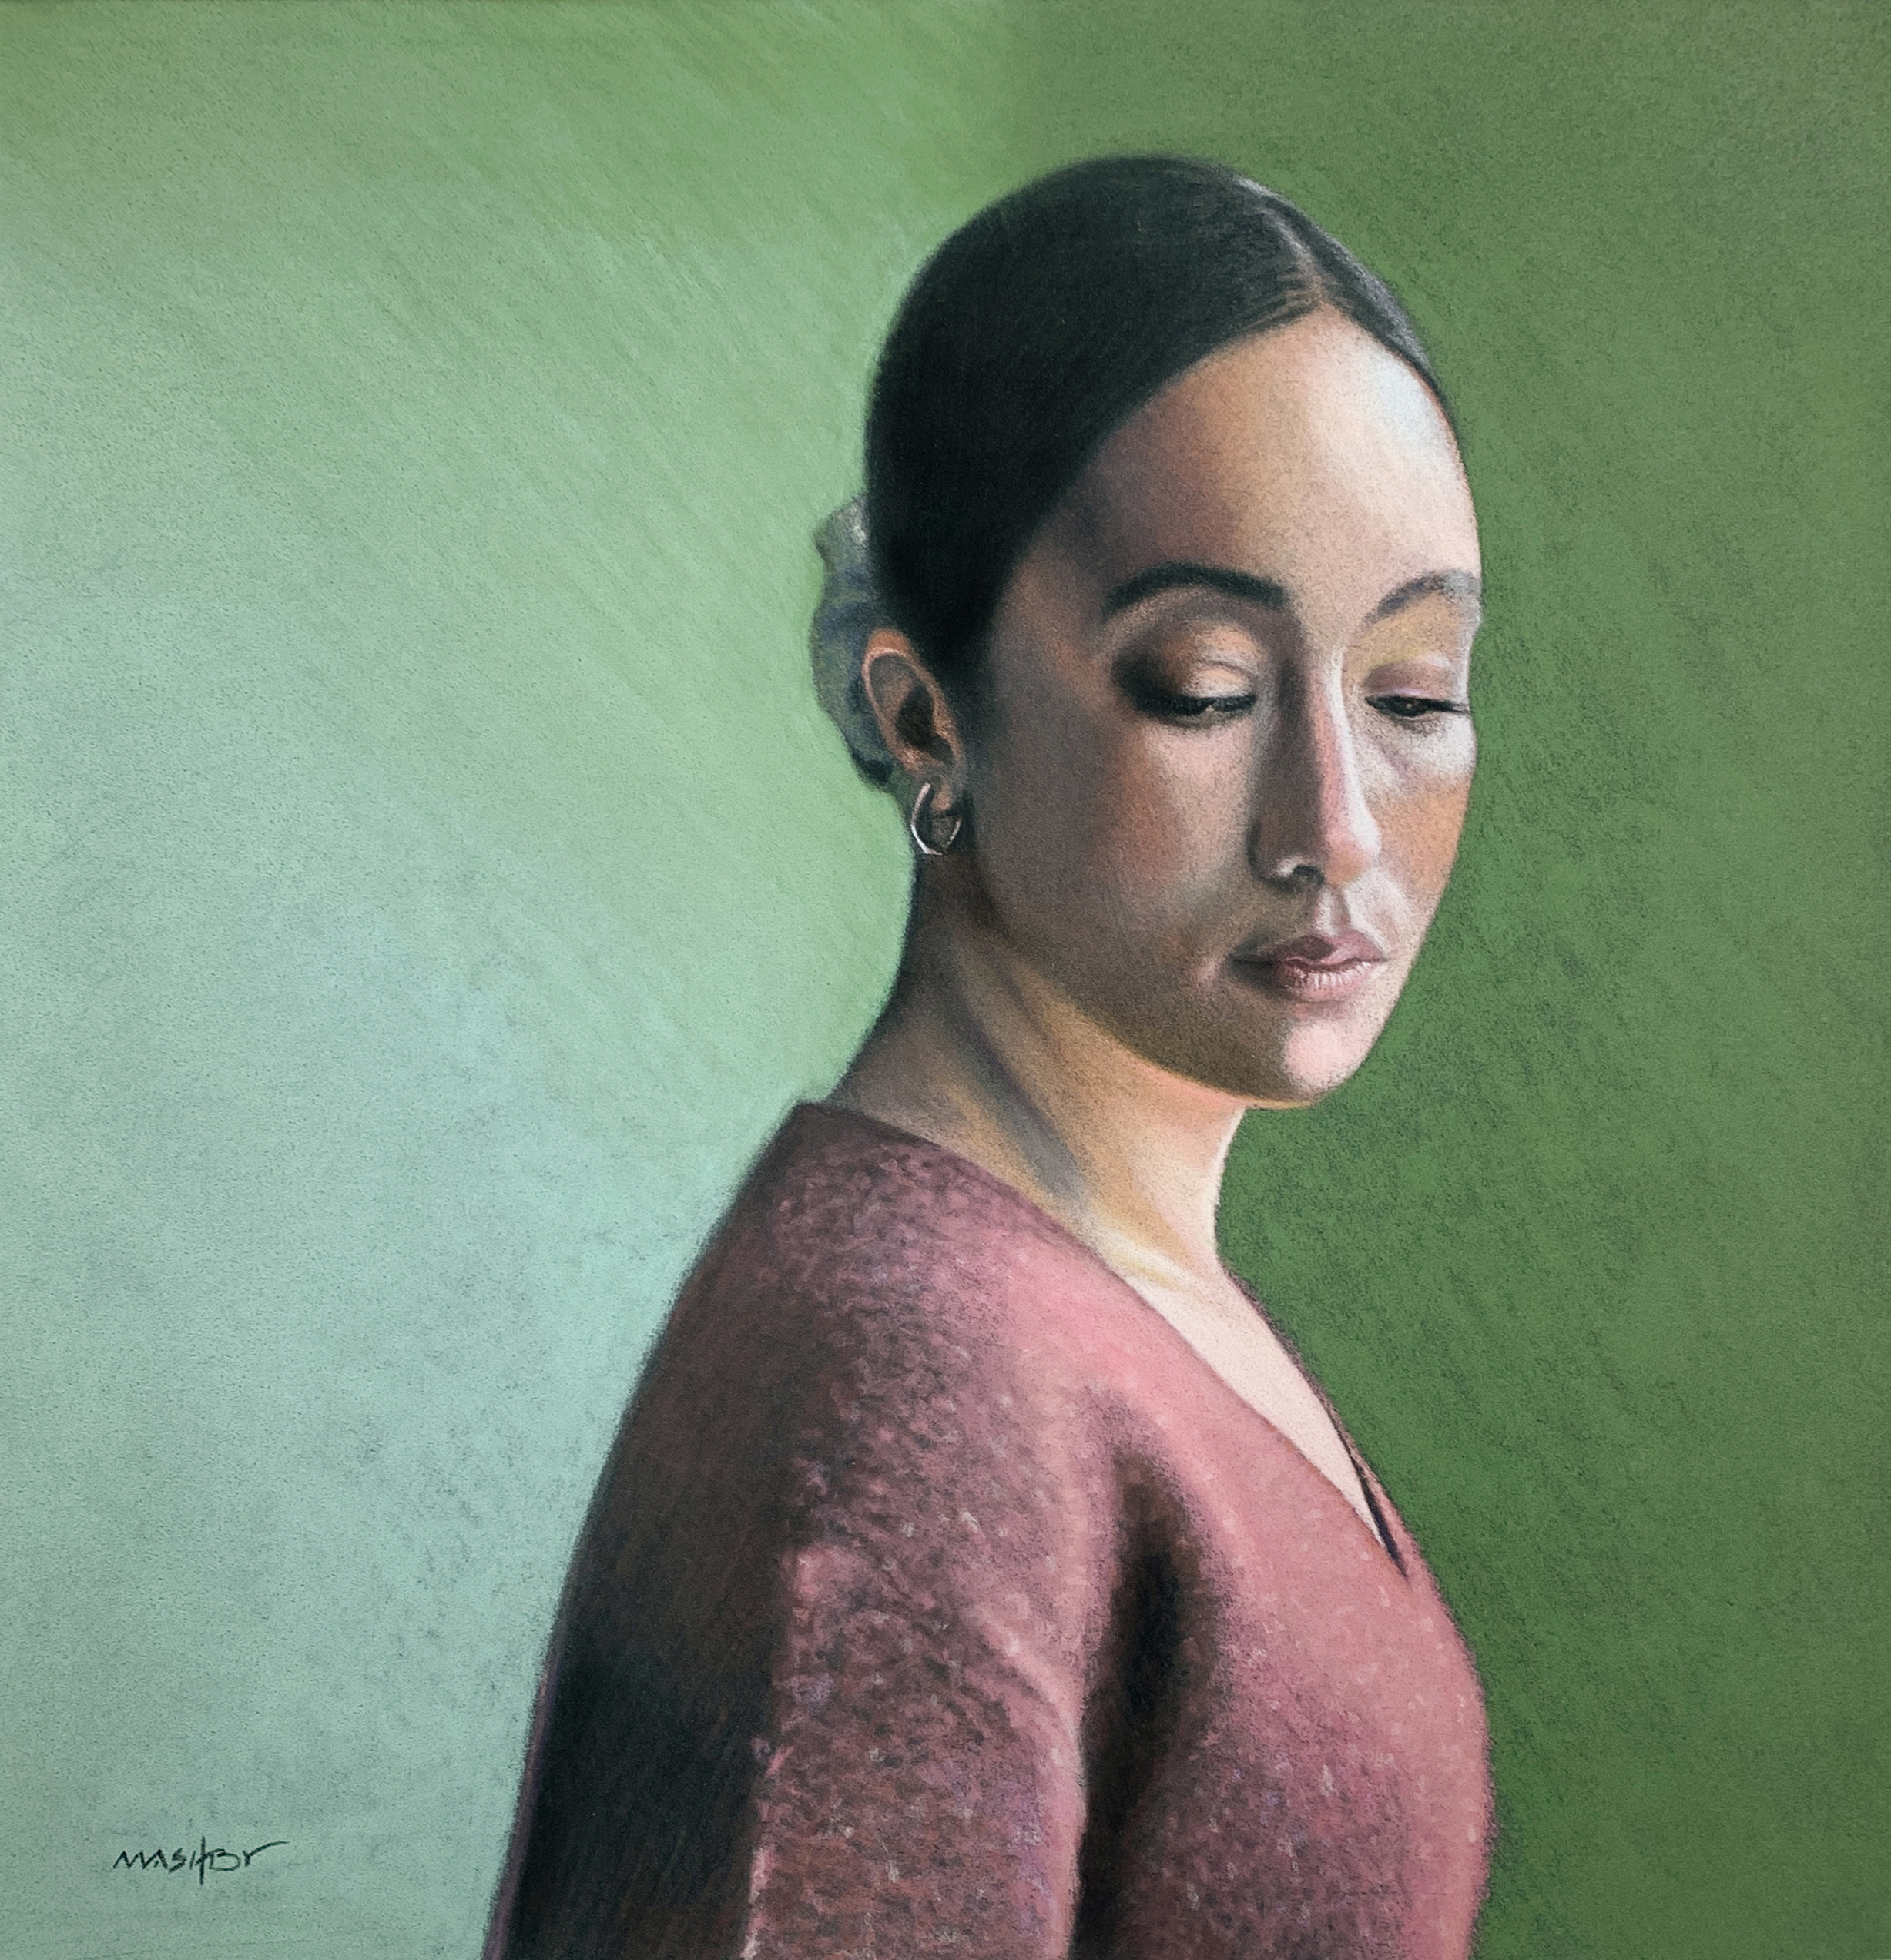 The grid method-Michele Ashby, "Breath," pastel on anthracite Pastelmat, 12 x 12 in